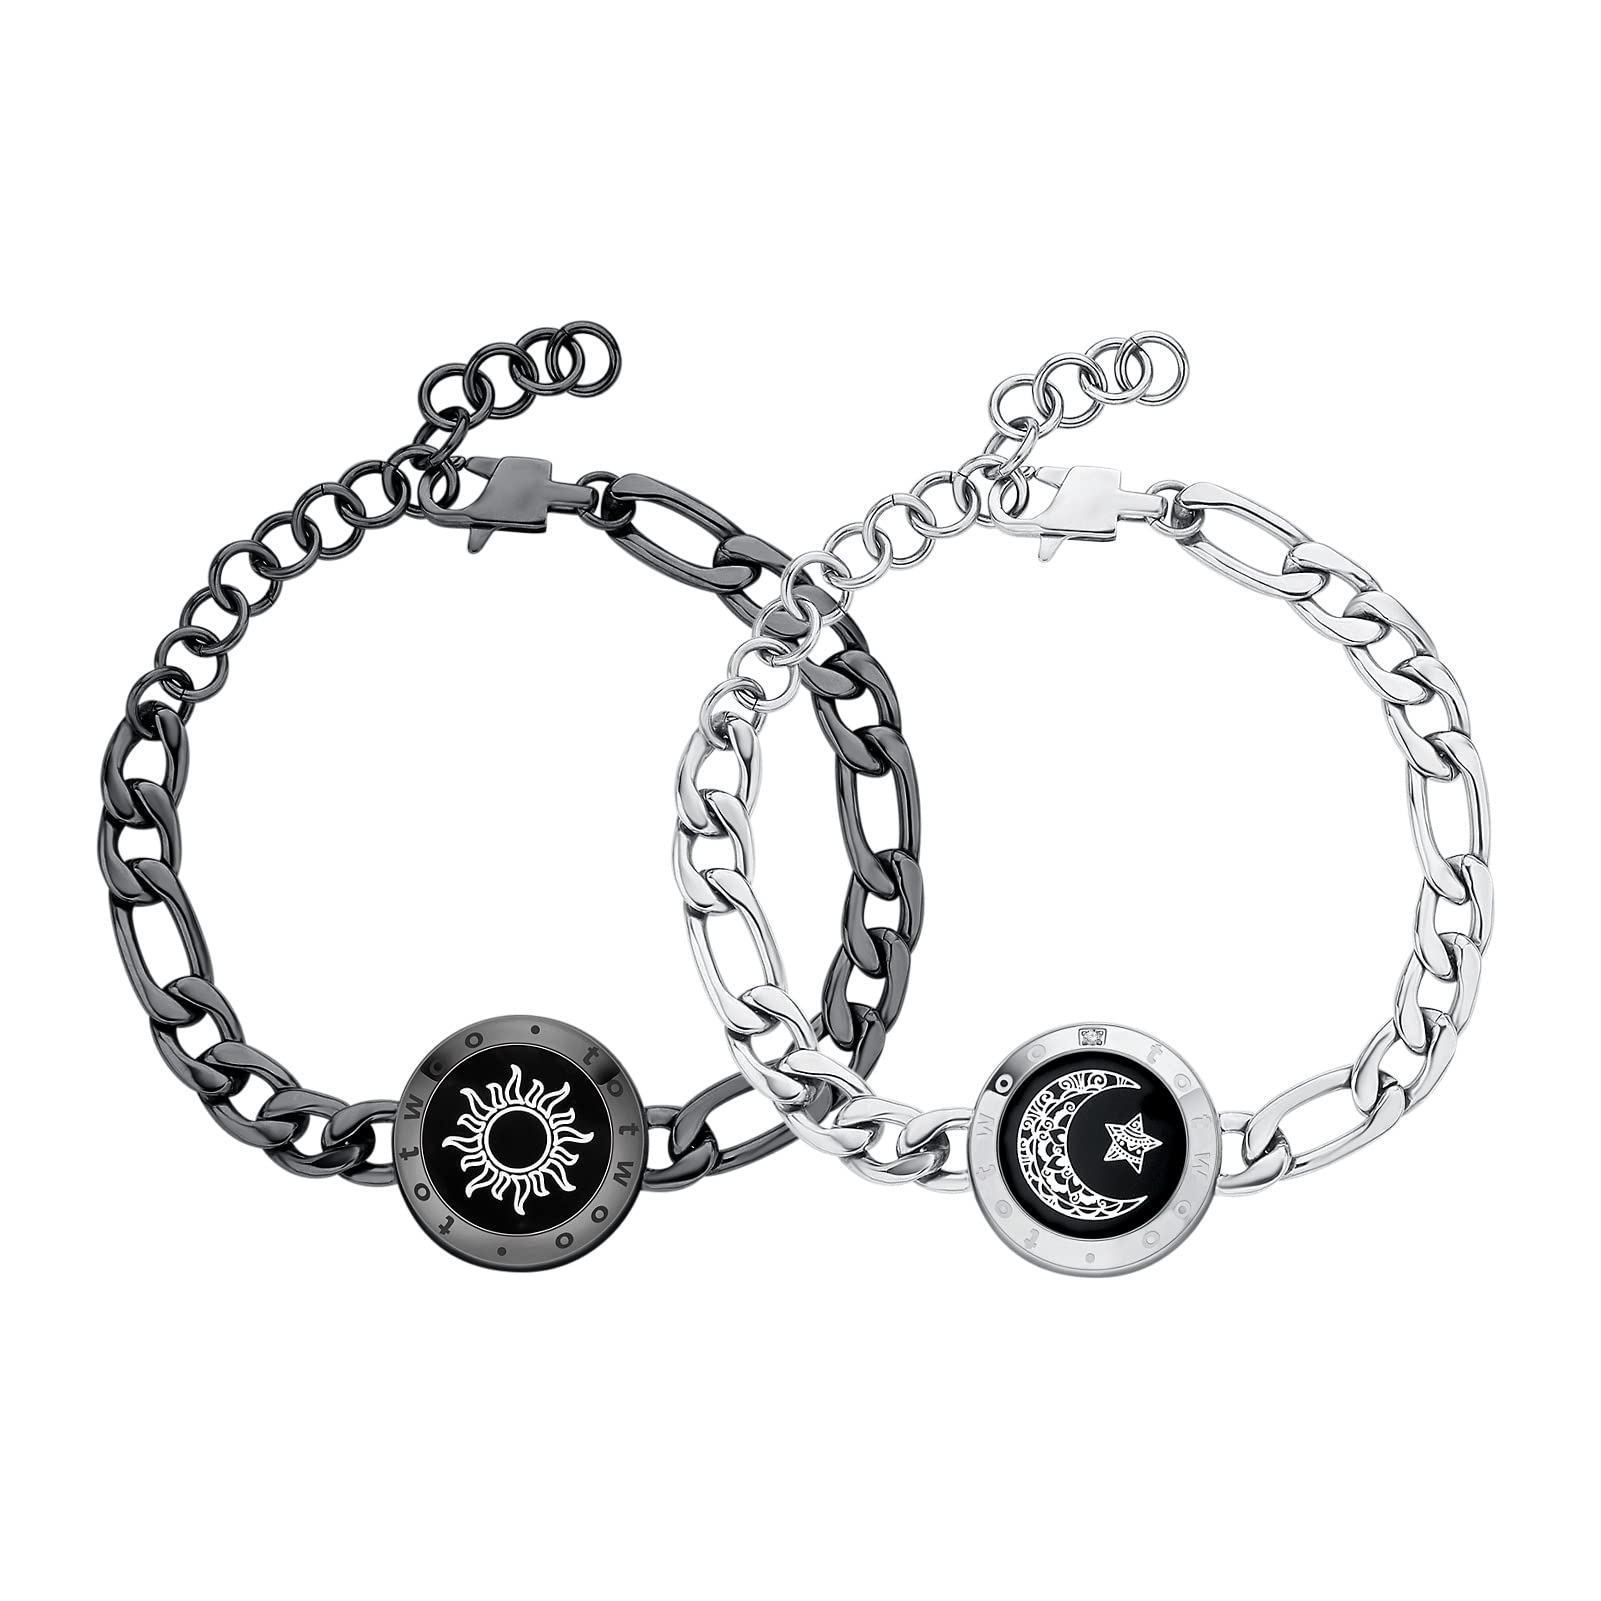 Totwoo Long Distance Touch Bracelets for Couples Relationship Light  up&Vibrate Smart Bracelets Bluetooth Connecting Jewelry-Mountain&Sea Milan  Rope Black Gold - Walmart.com